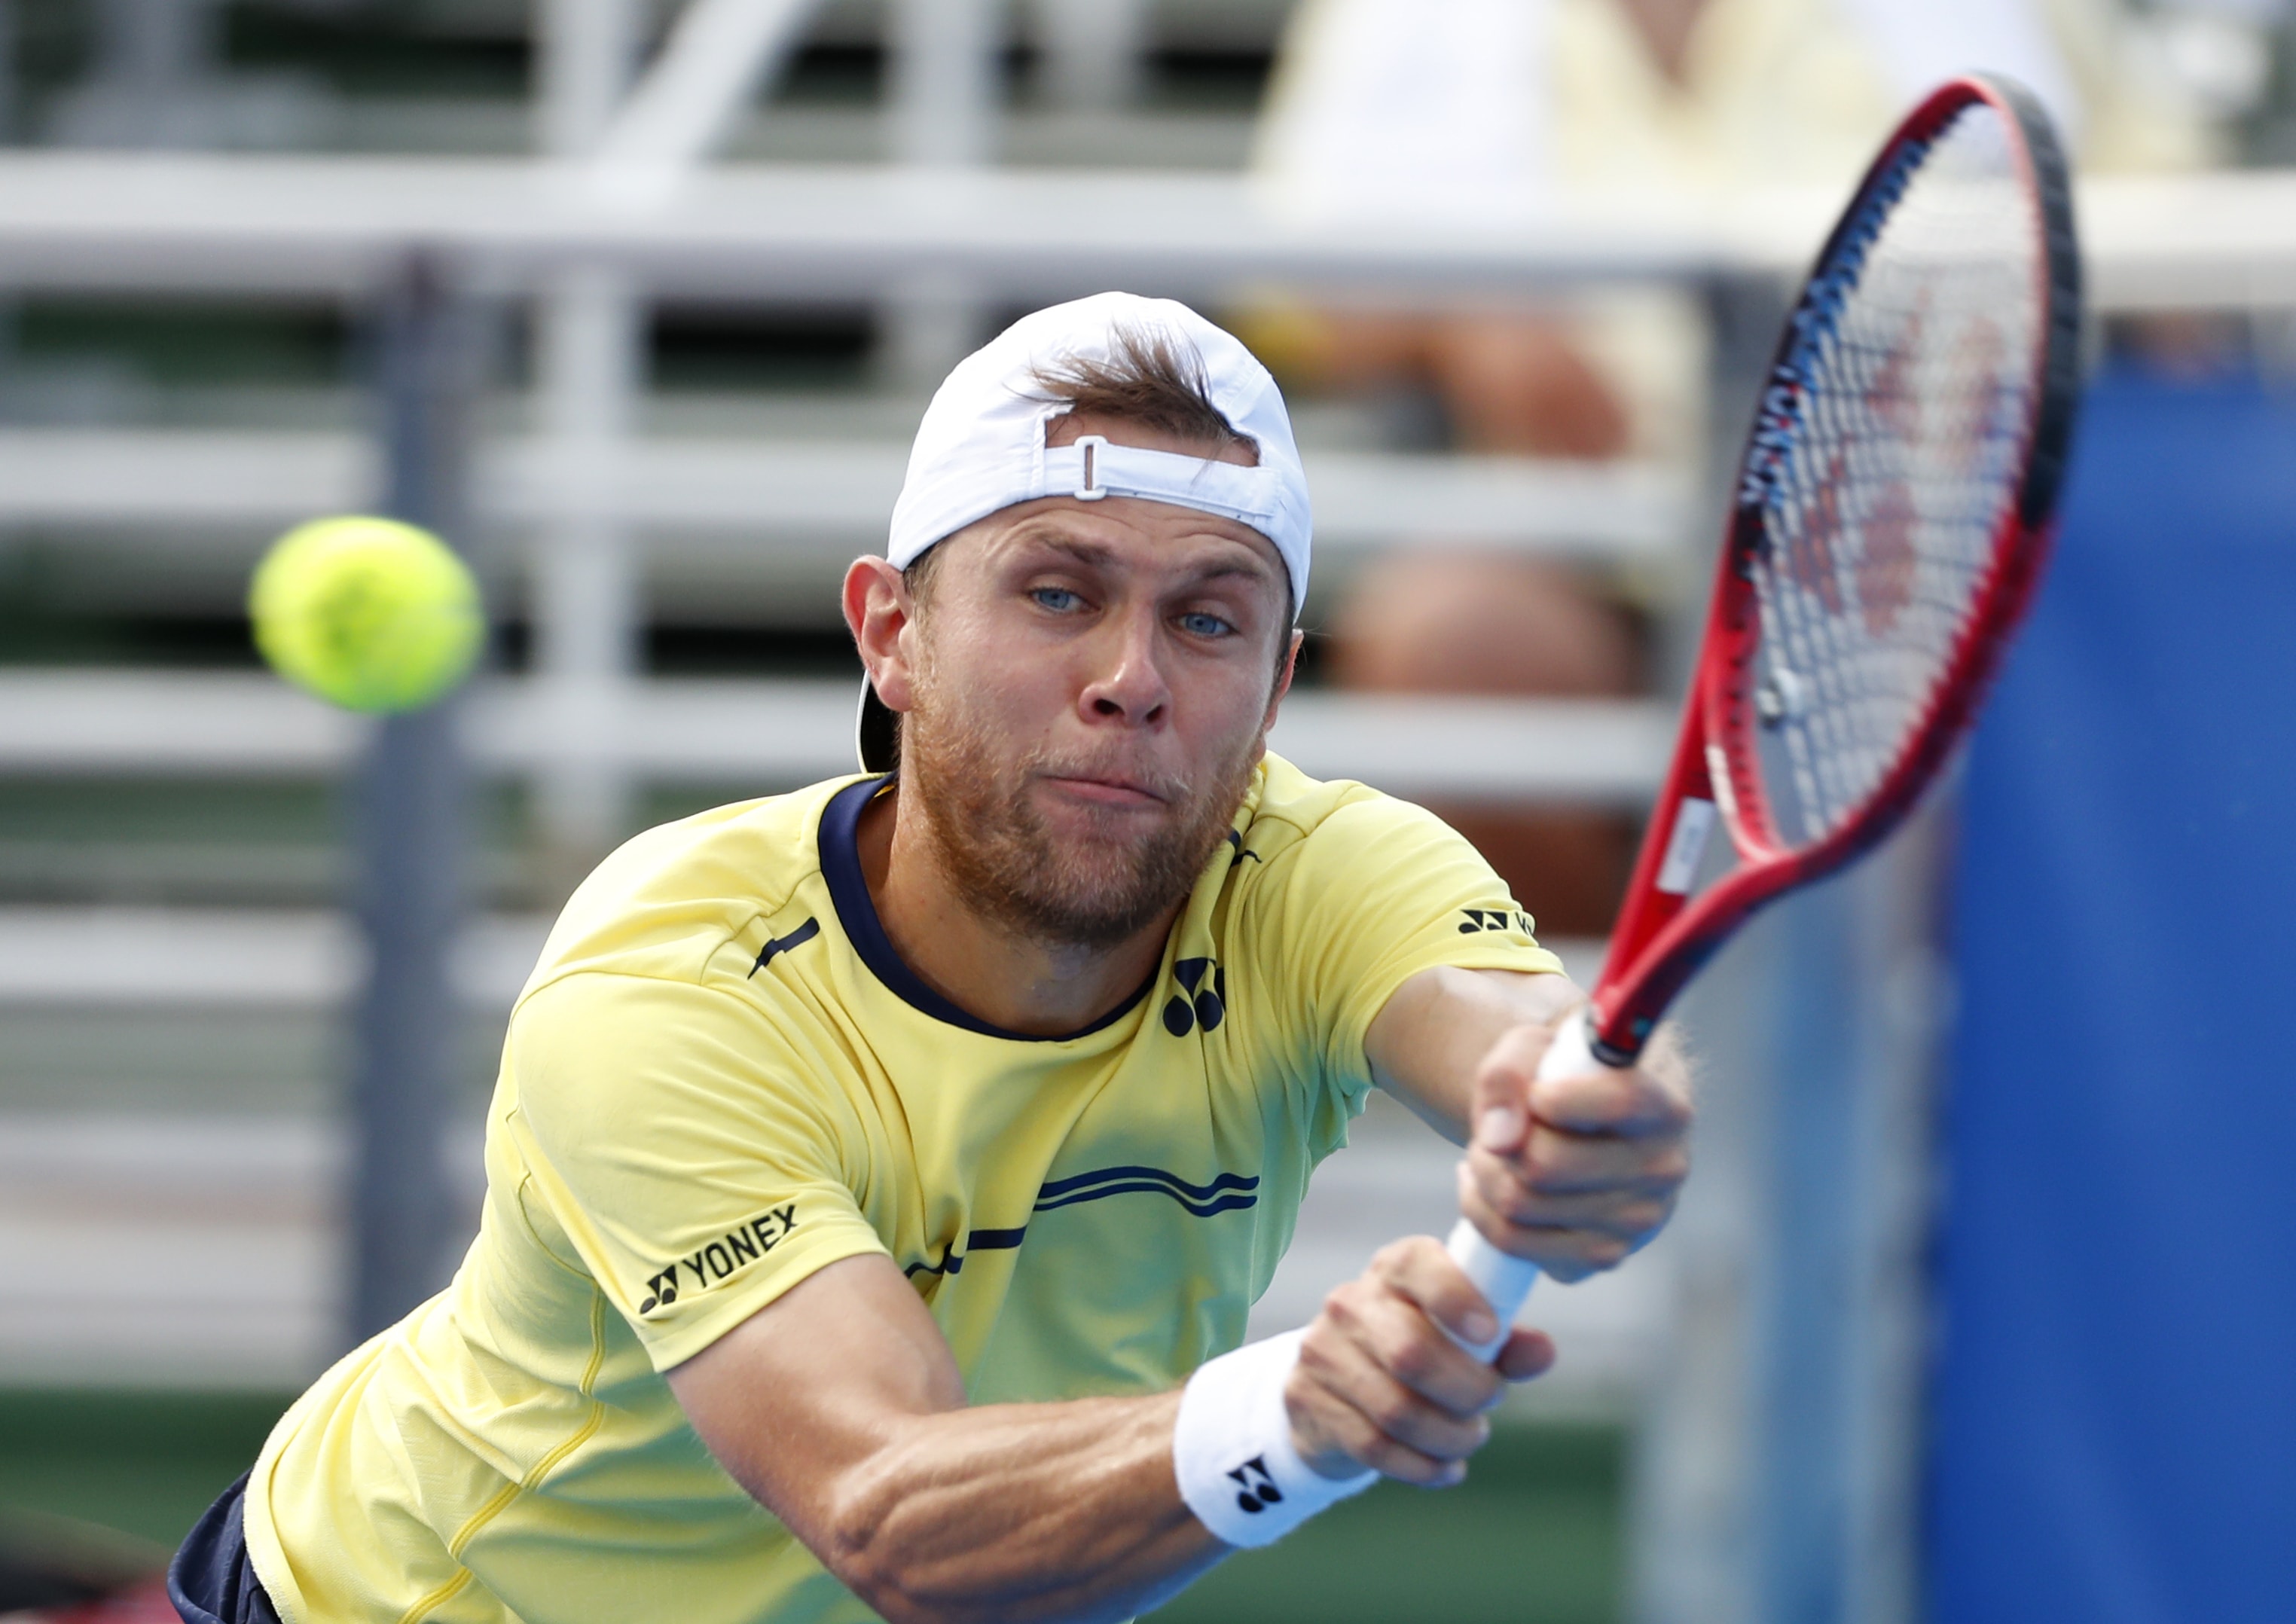 HIGHLIGHTS Radu Albot becomes first Moldovan to win ATP title